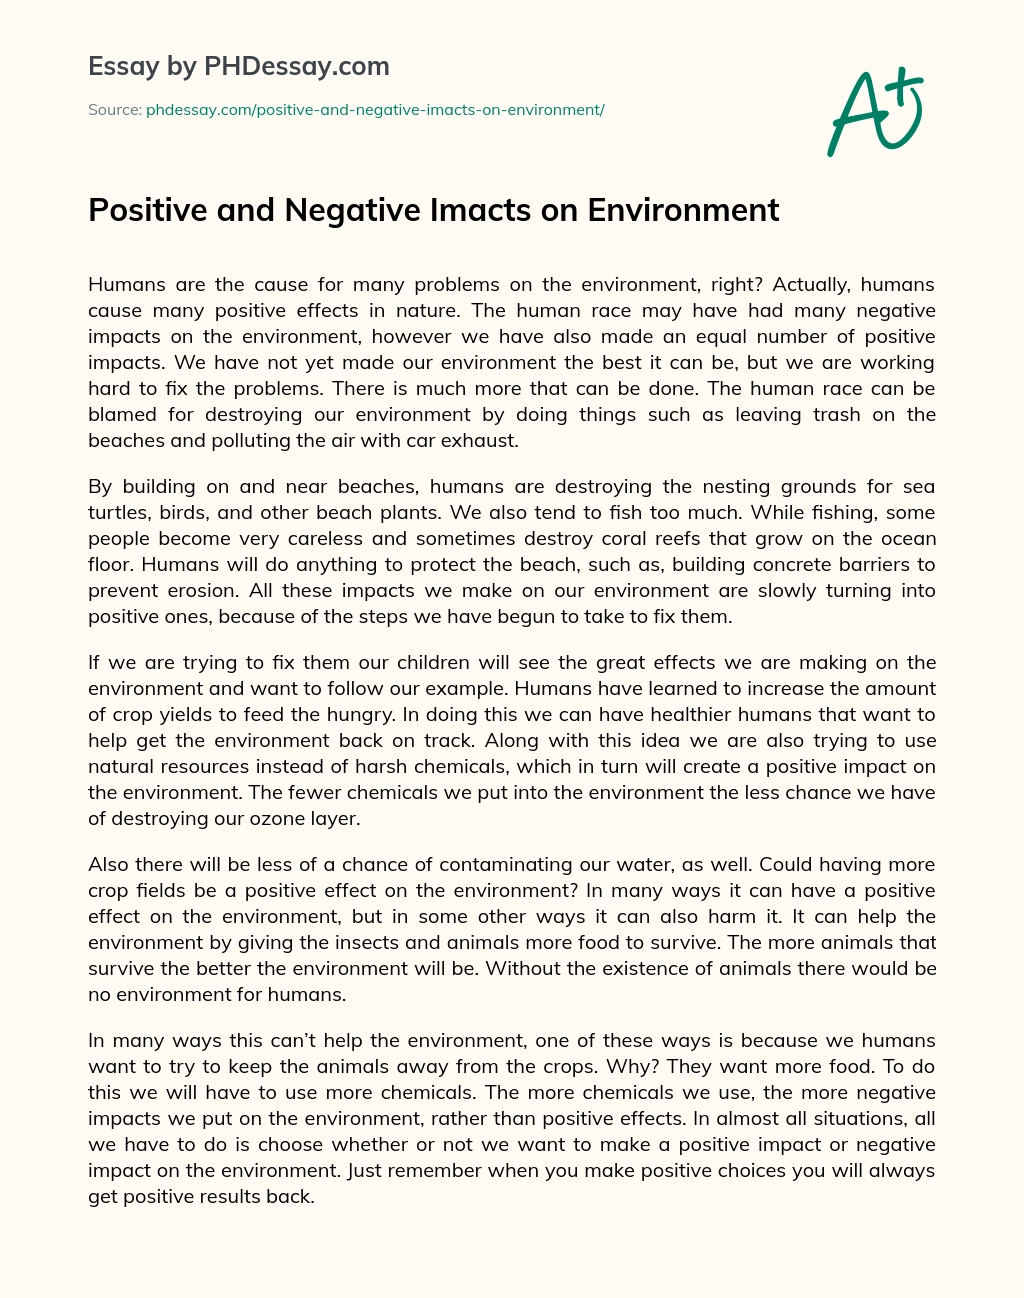 Positive and Negative Imacts on Environment essay